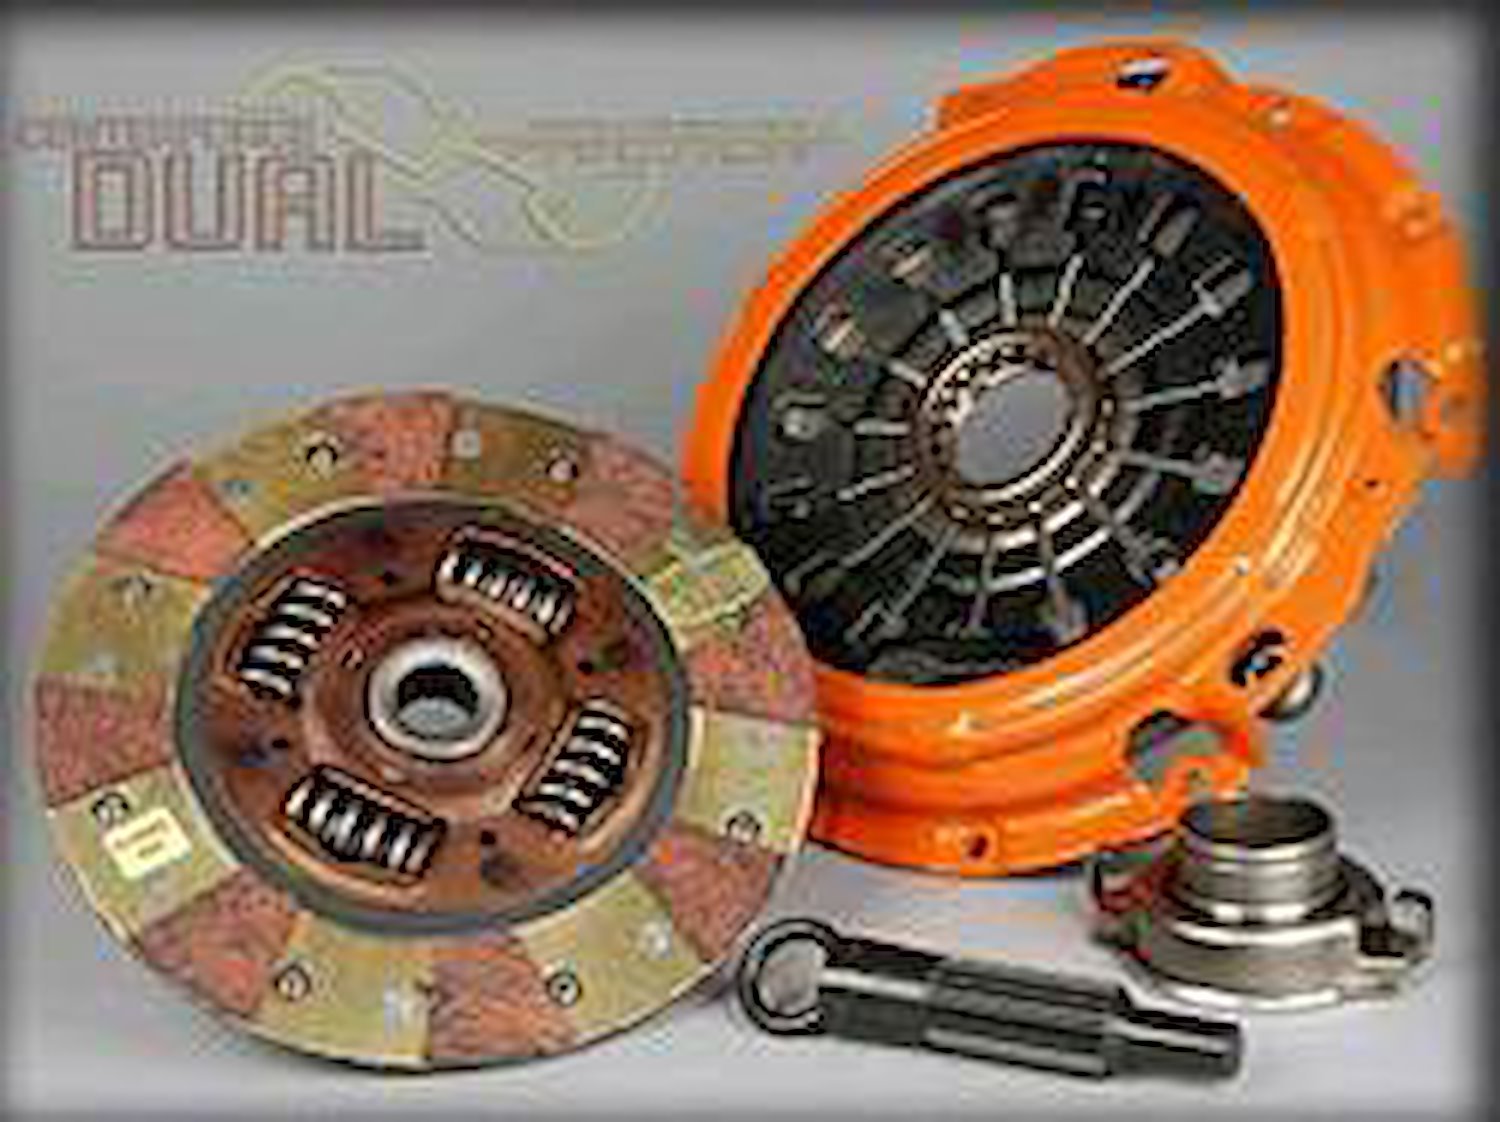 Centerforce II Clutch Kit Includes Pressure Plate, Disc, Throwout Bearing and Alignment Tool